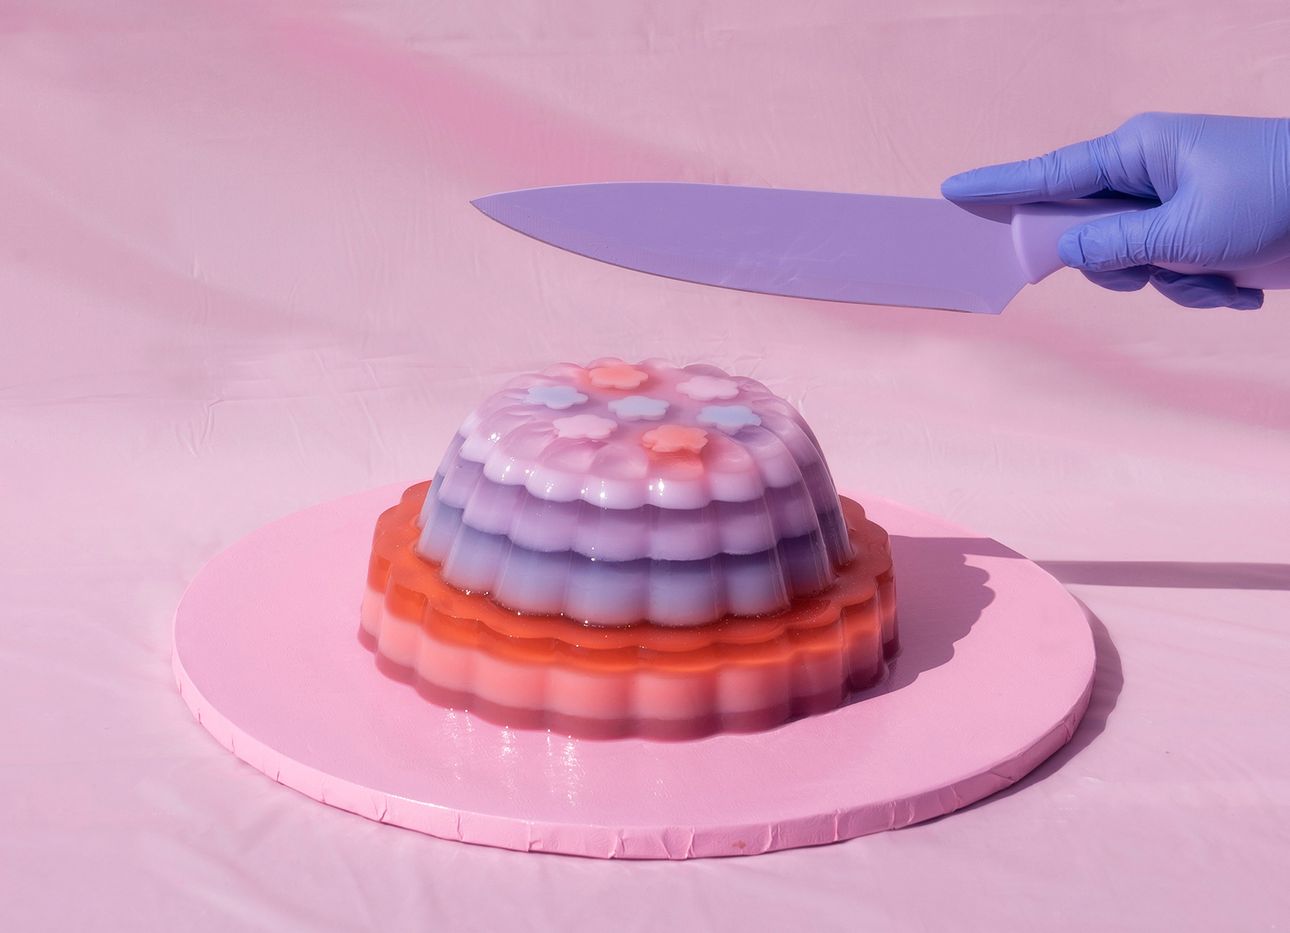 A hand in a blue plastic glove holds a purple knife above a pink, purple, and red jelly cake atop a pink platter.